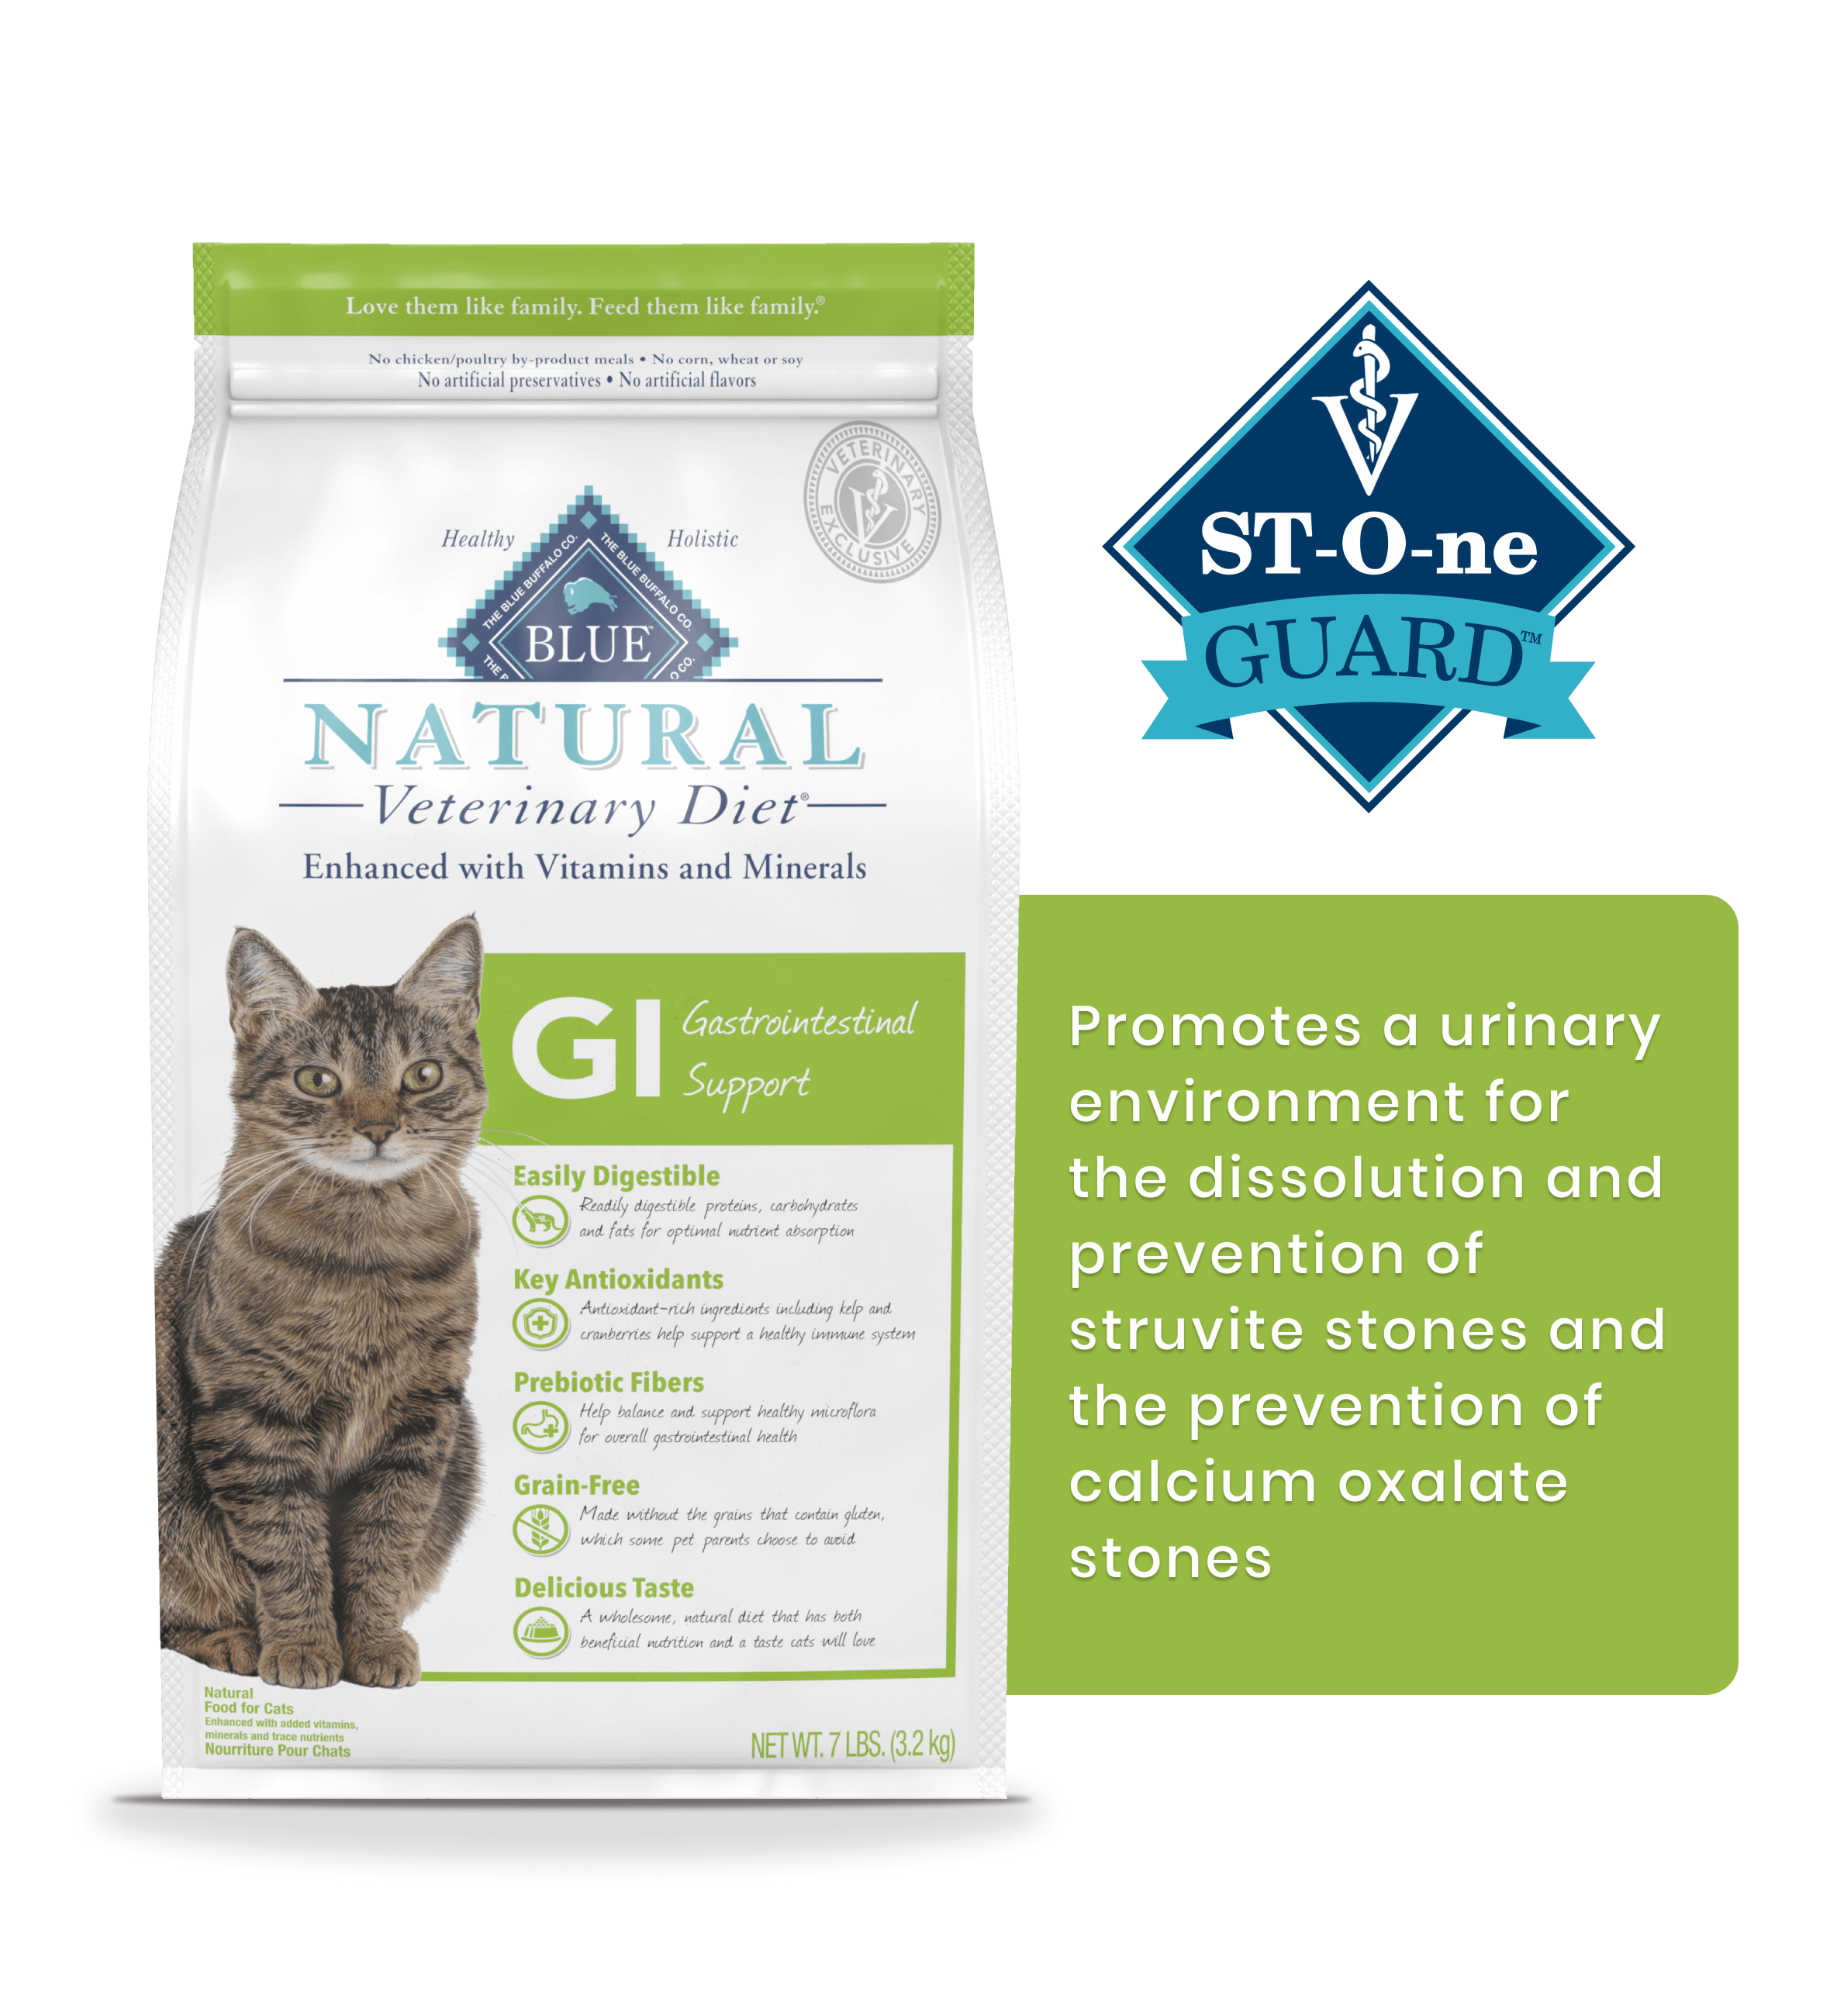 GI Gastrointestinal Support St-O-ne Guard Promotes a urinary environment for the dissolution and prevention of struvite stones and the prevention of calcium oxalate stones